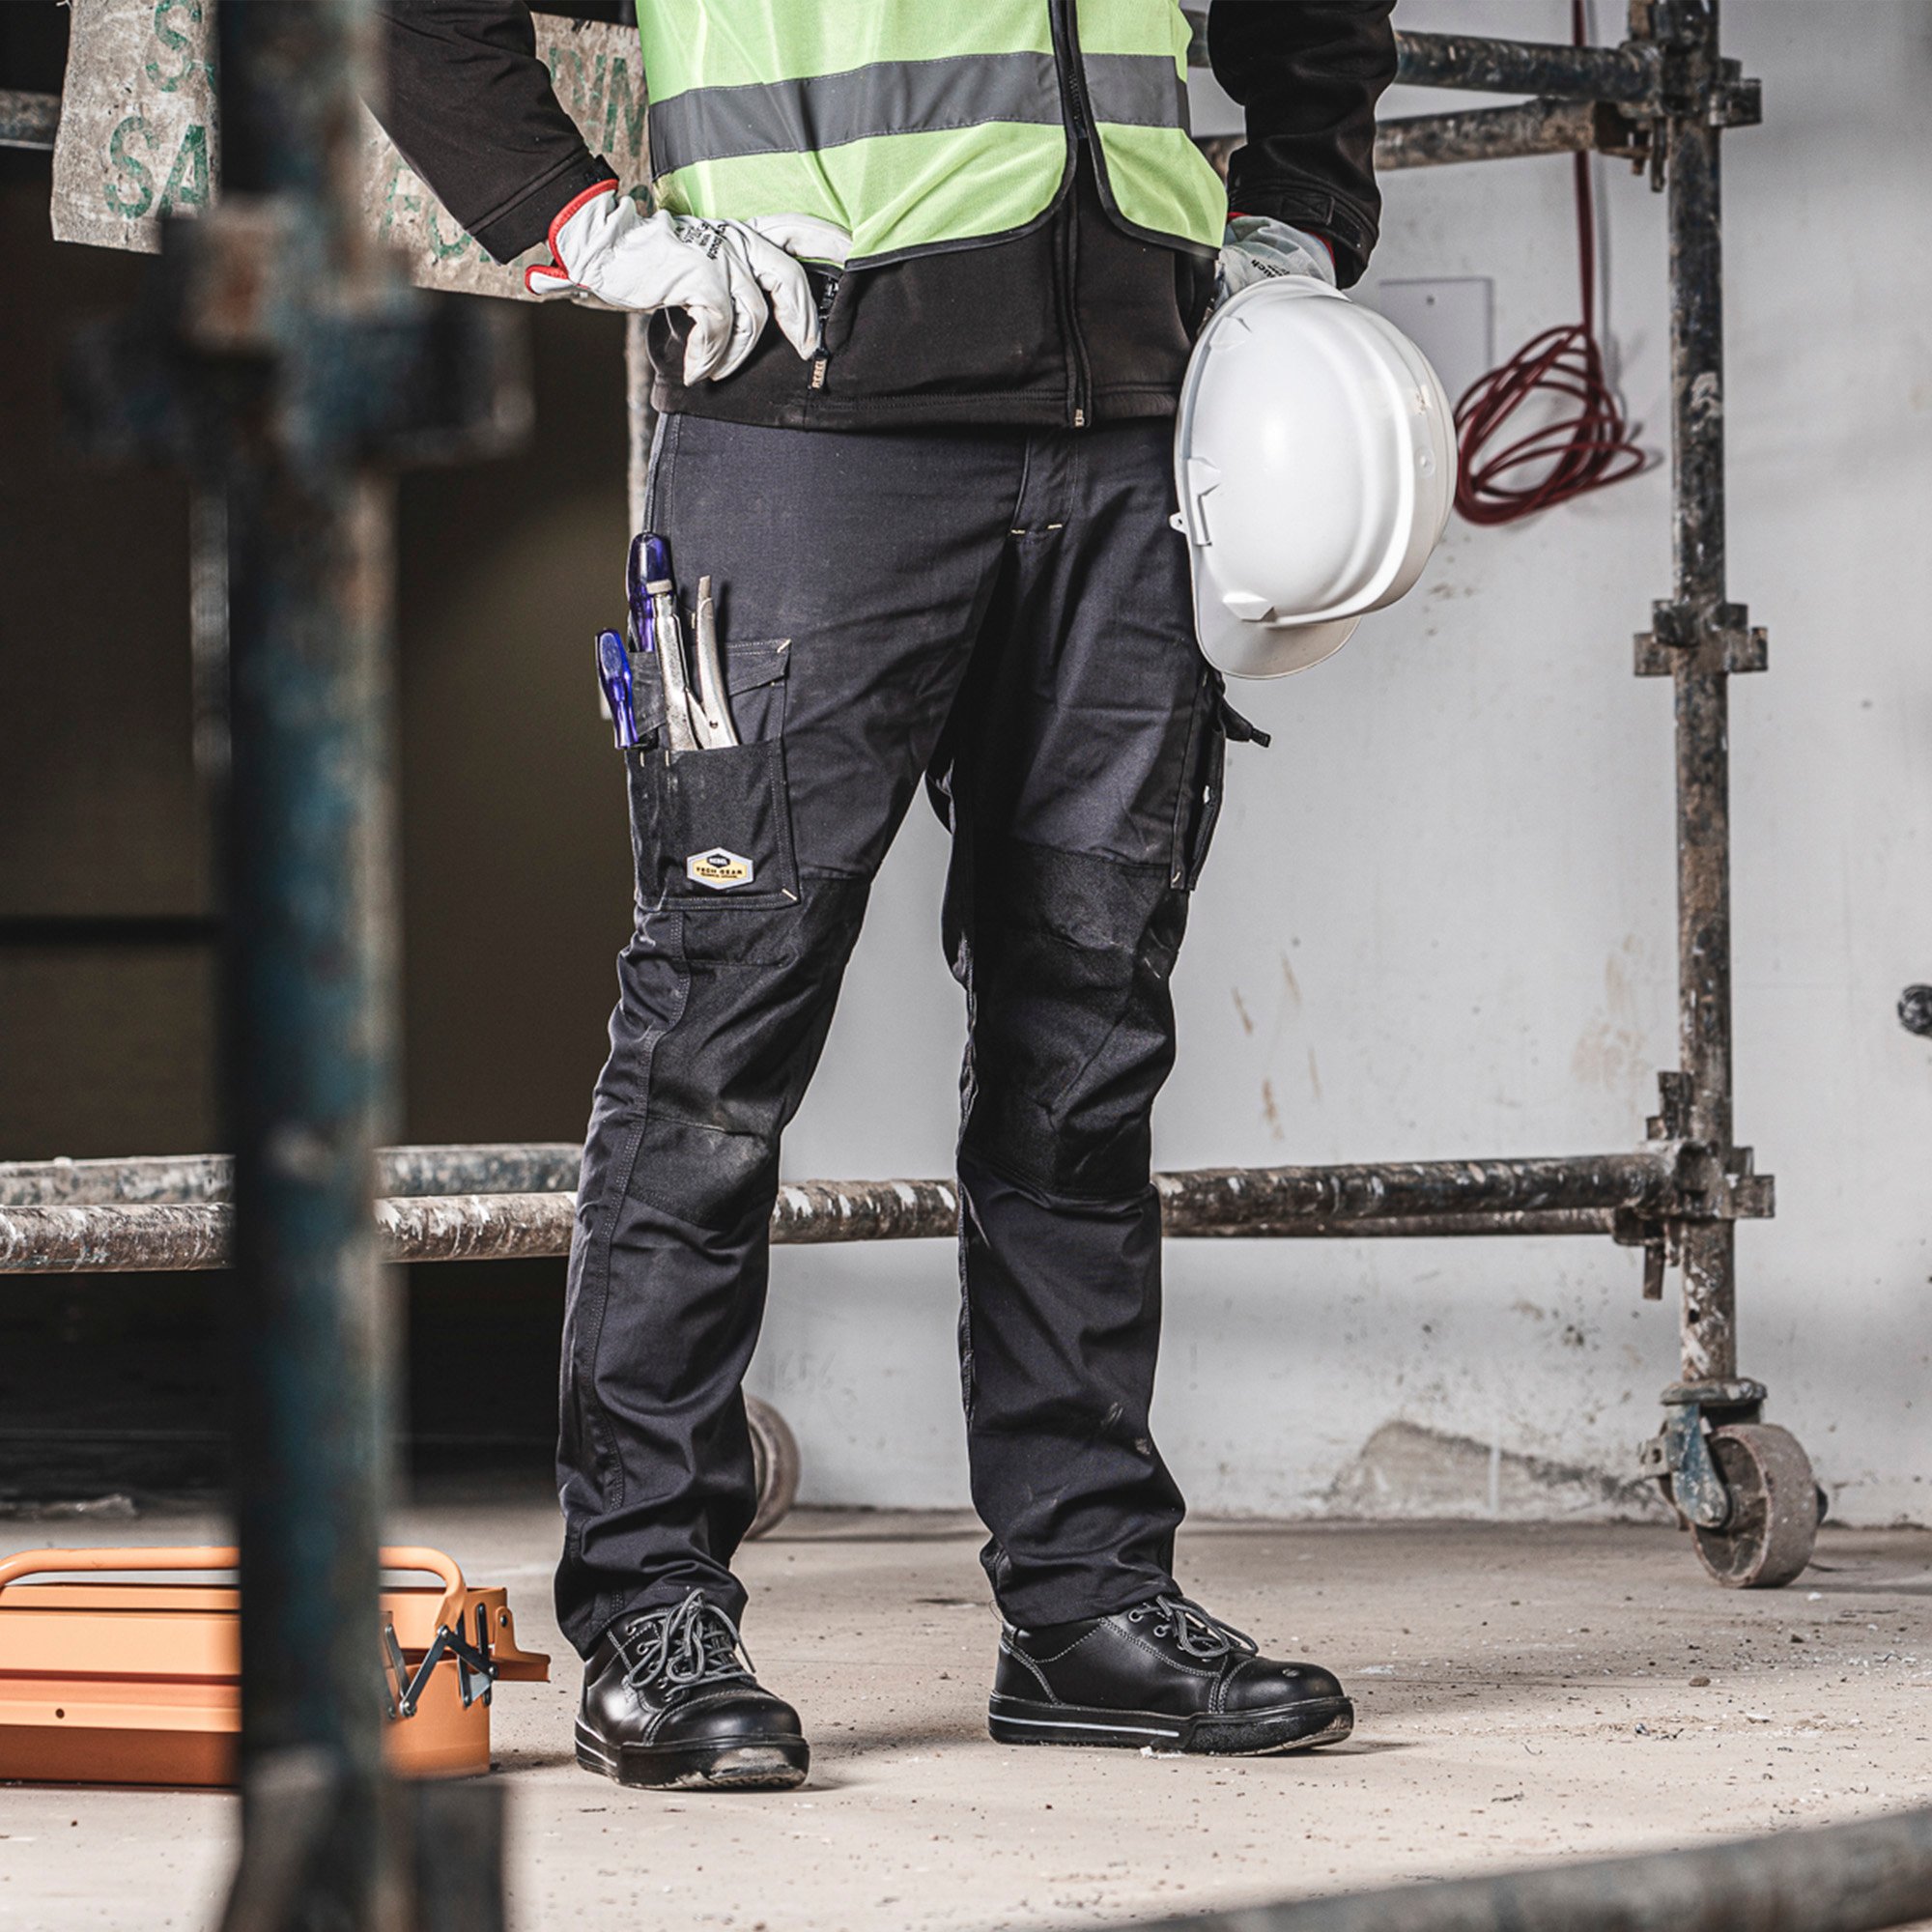 Buy Grey Work Trousers  Workwear Essentials For All Traders  Forja Wears